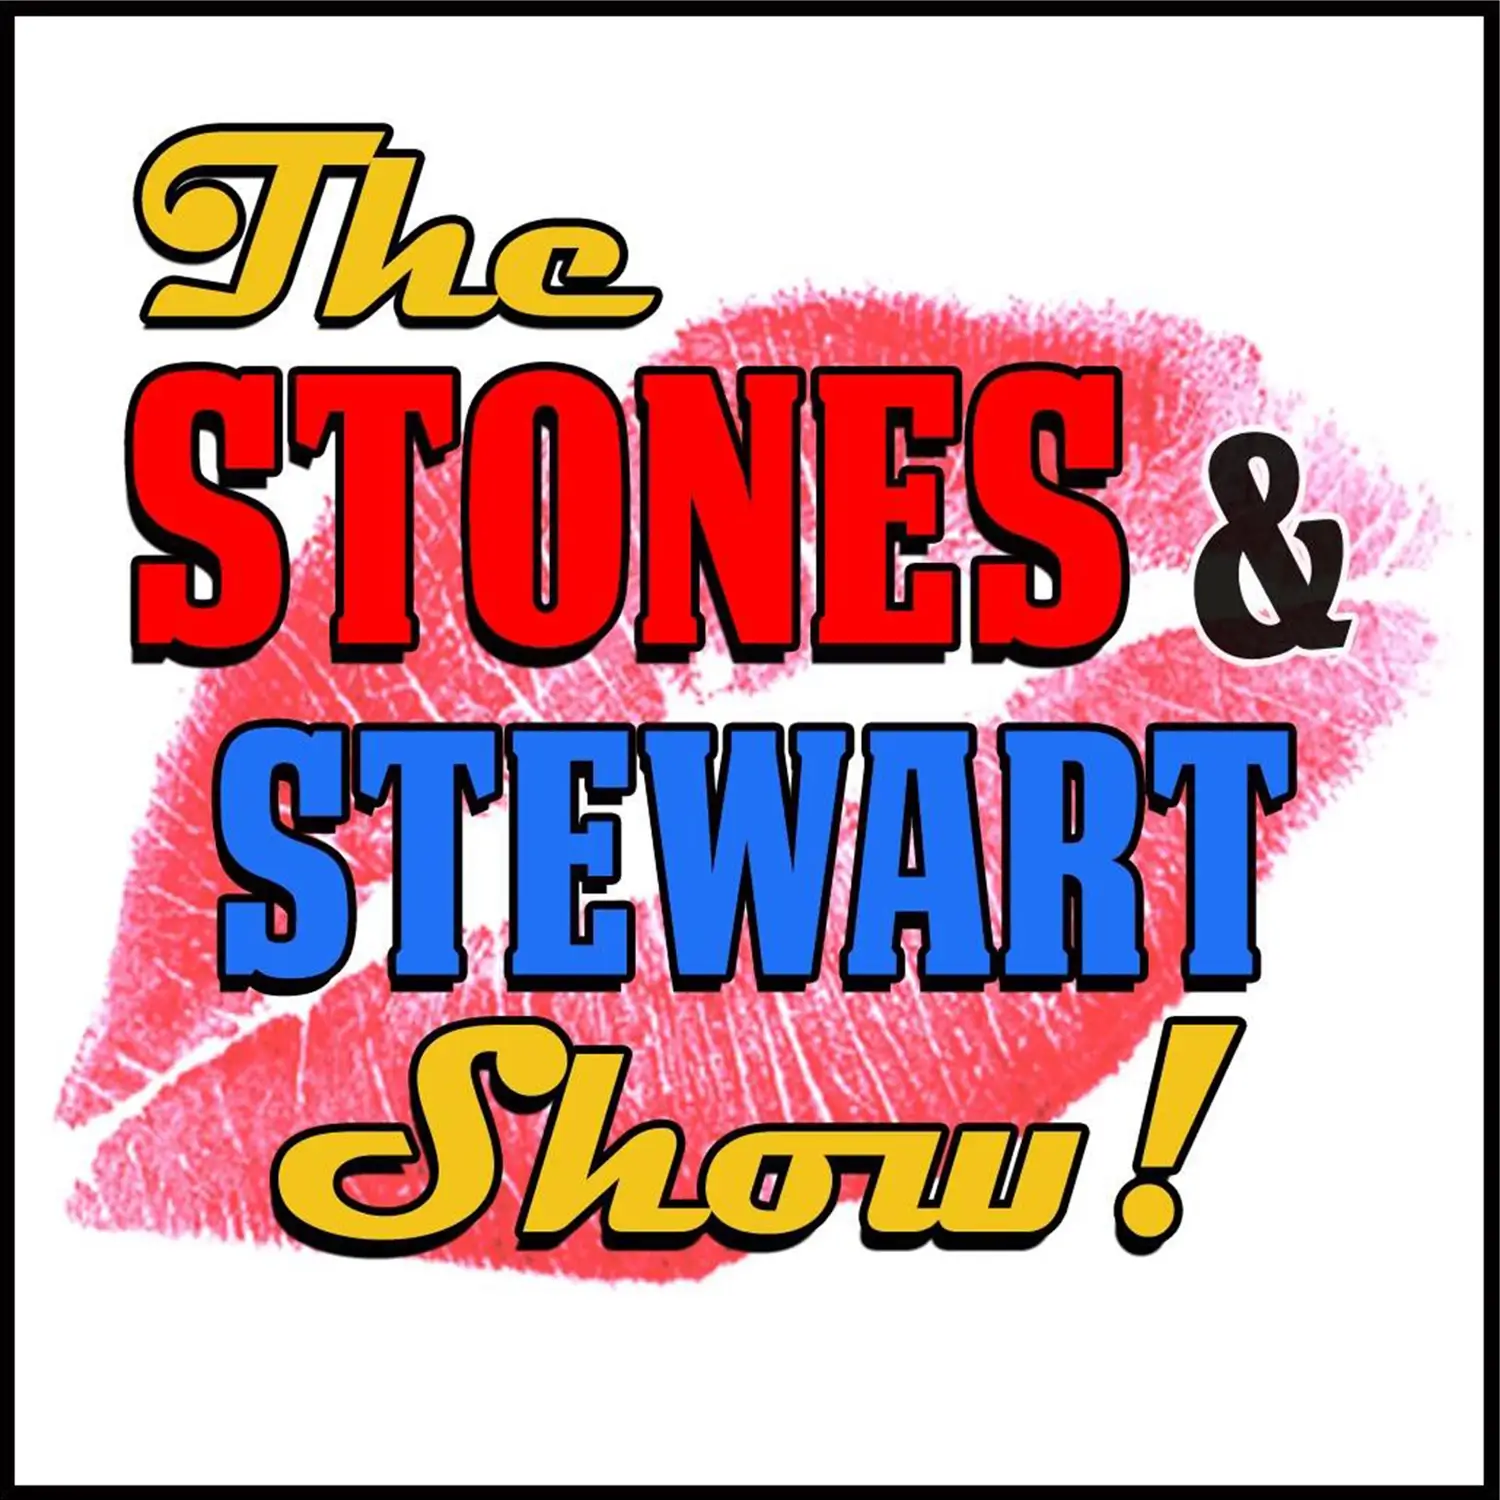 Stones & Stewart | Celebrating Rod Stewart and The Rolling Stones